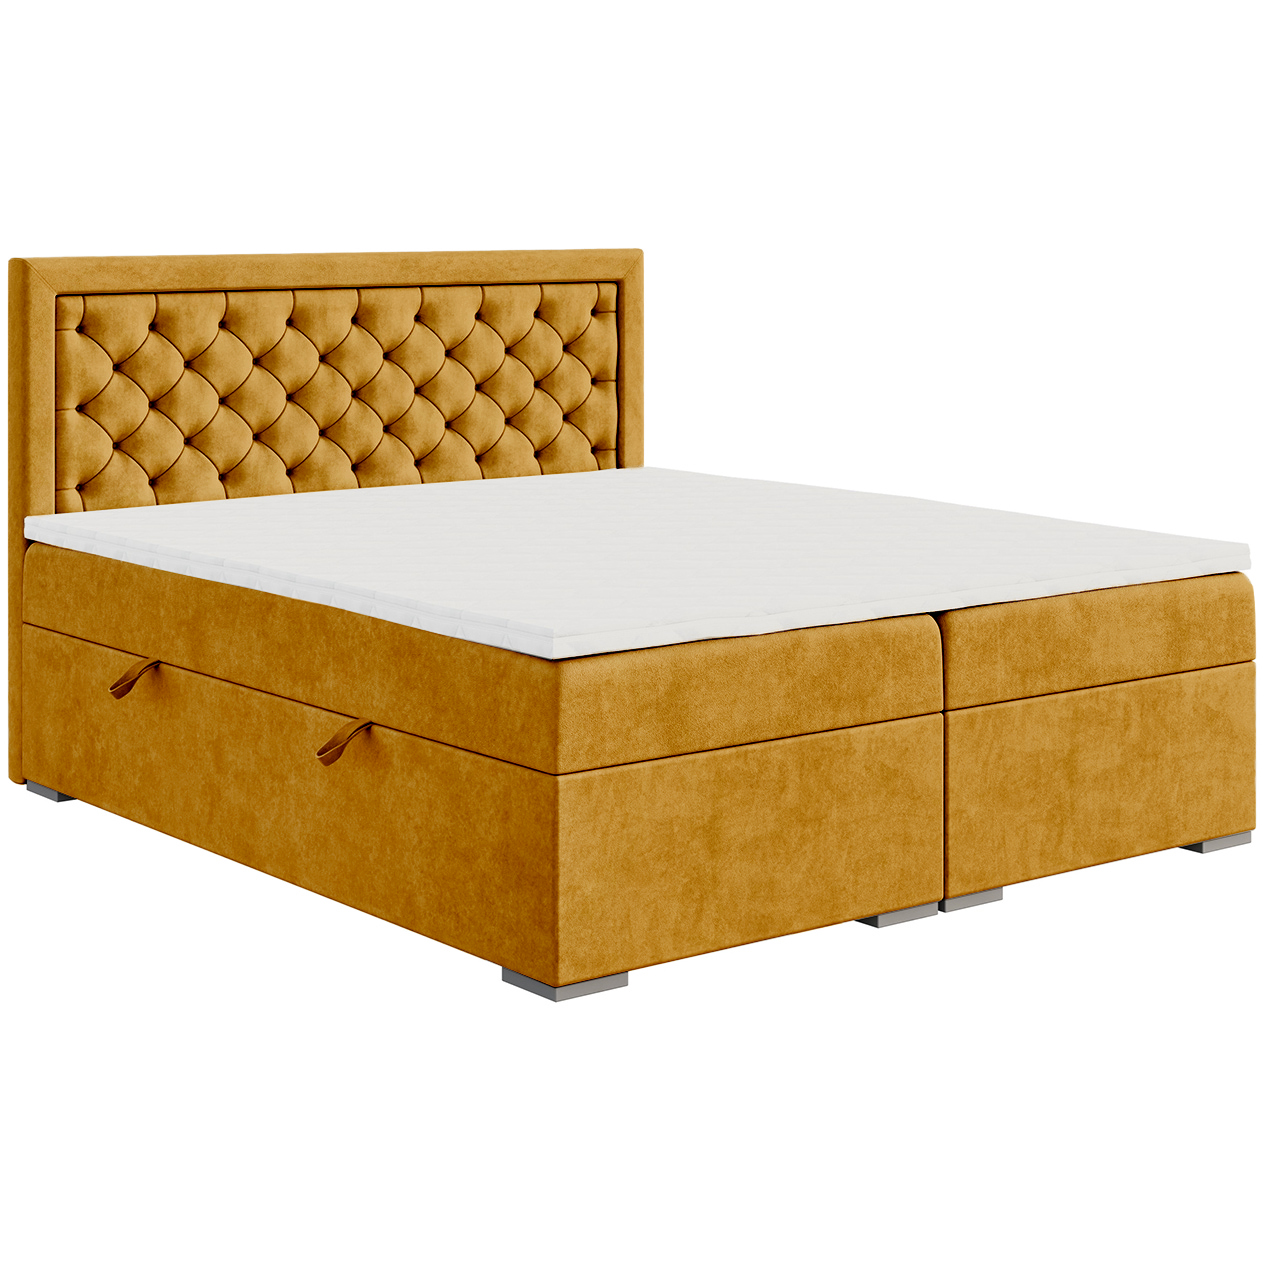 Upholstered bed BLUM 140x200 riviera 41